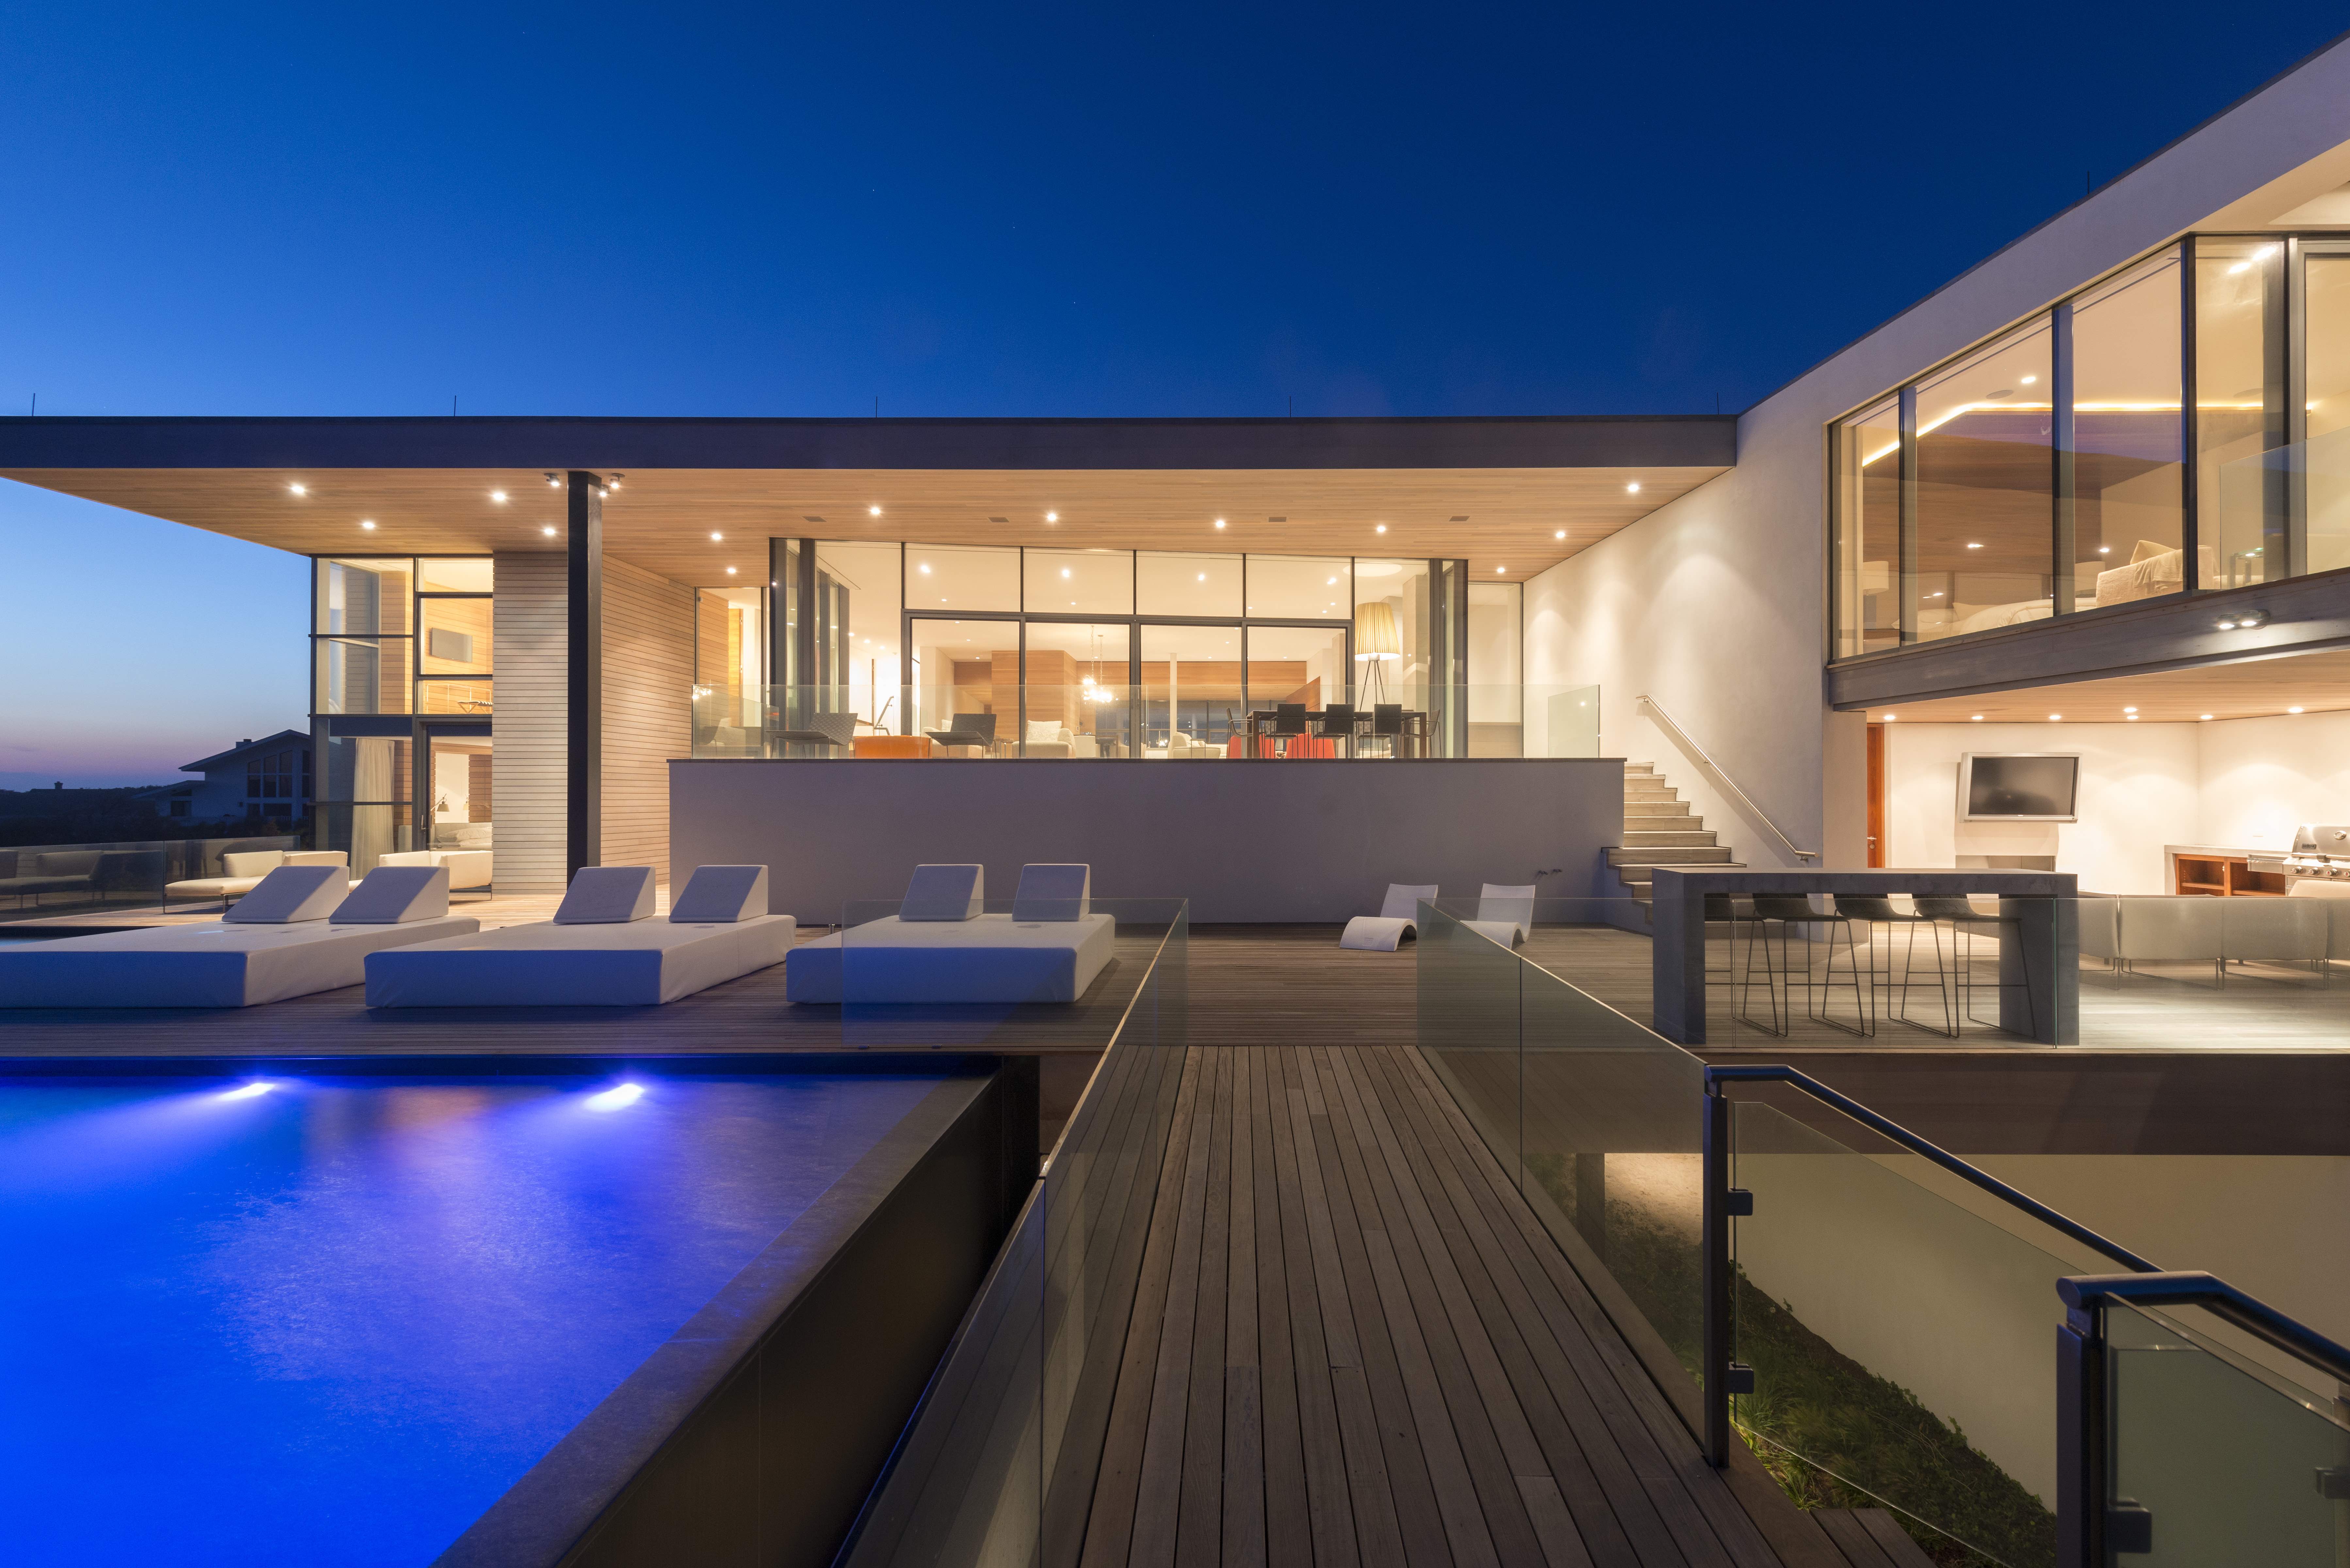 A modern beachfront home in Bridgehampton, NY constructed by Ben Krupinski Builder as designed by Barnes Coy Architect. Photo: Paul Domzal